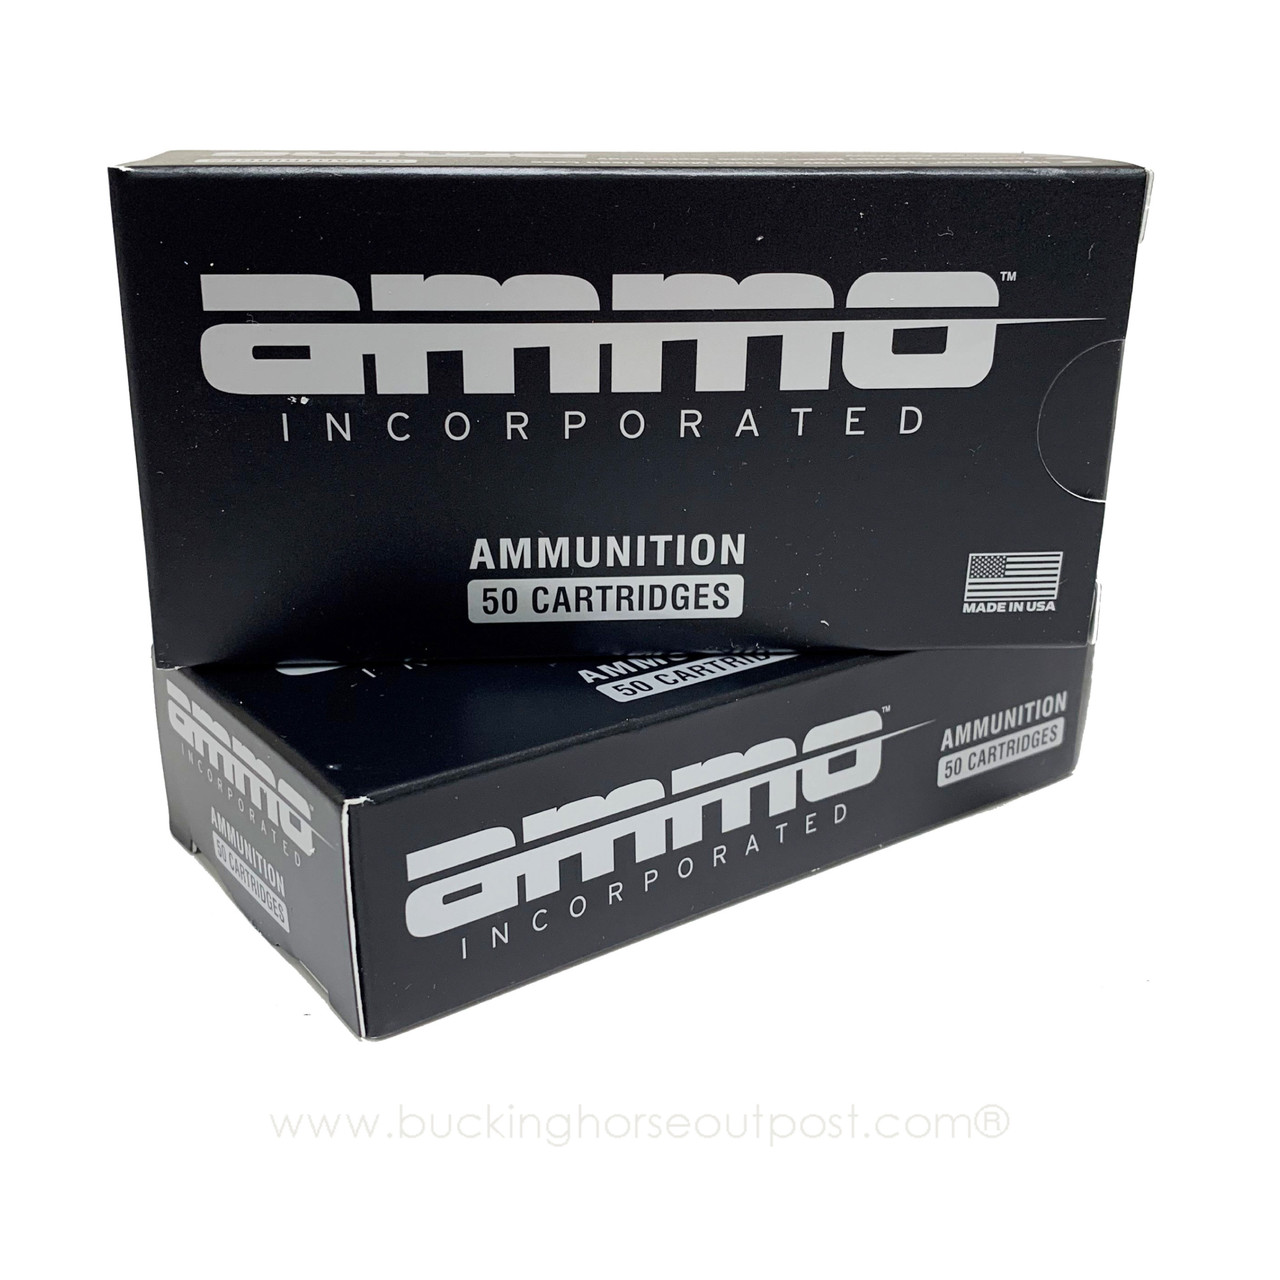 Ammo Inc. Signature 9mm 115 Grain Total Metal Coating 50rds Per Box (9115TMC-A50)- FREE SHIPPING ON ORDERS OVER $175